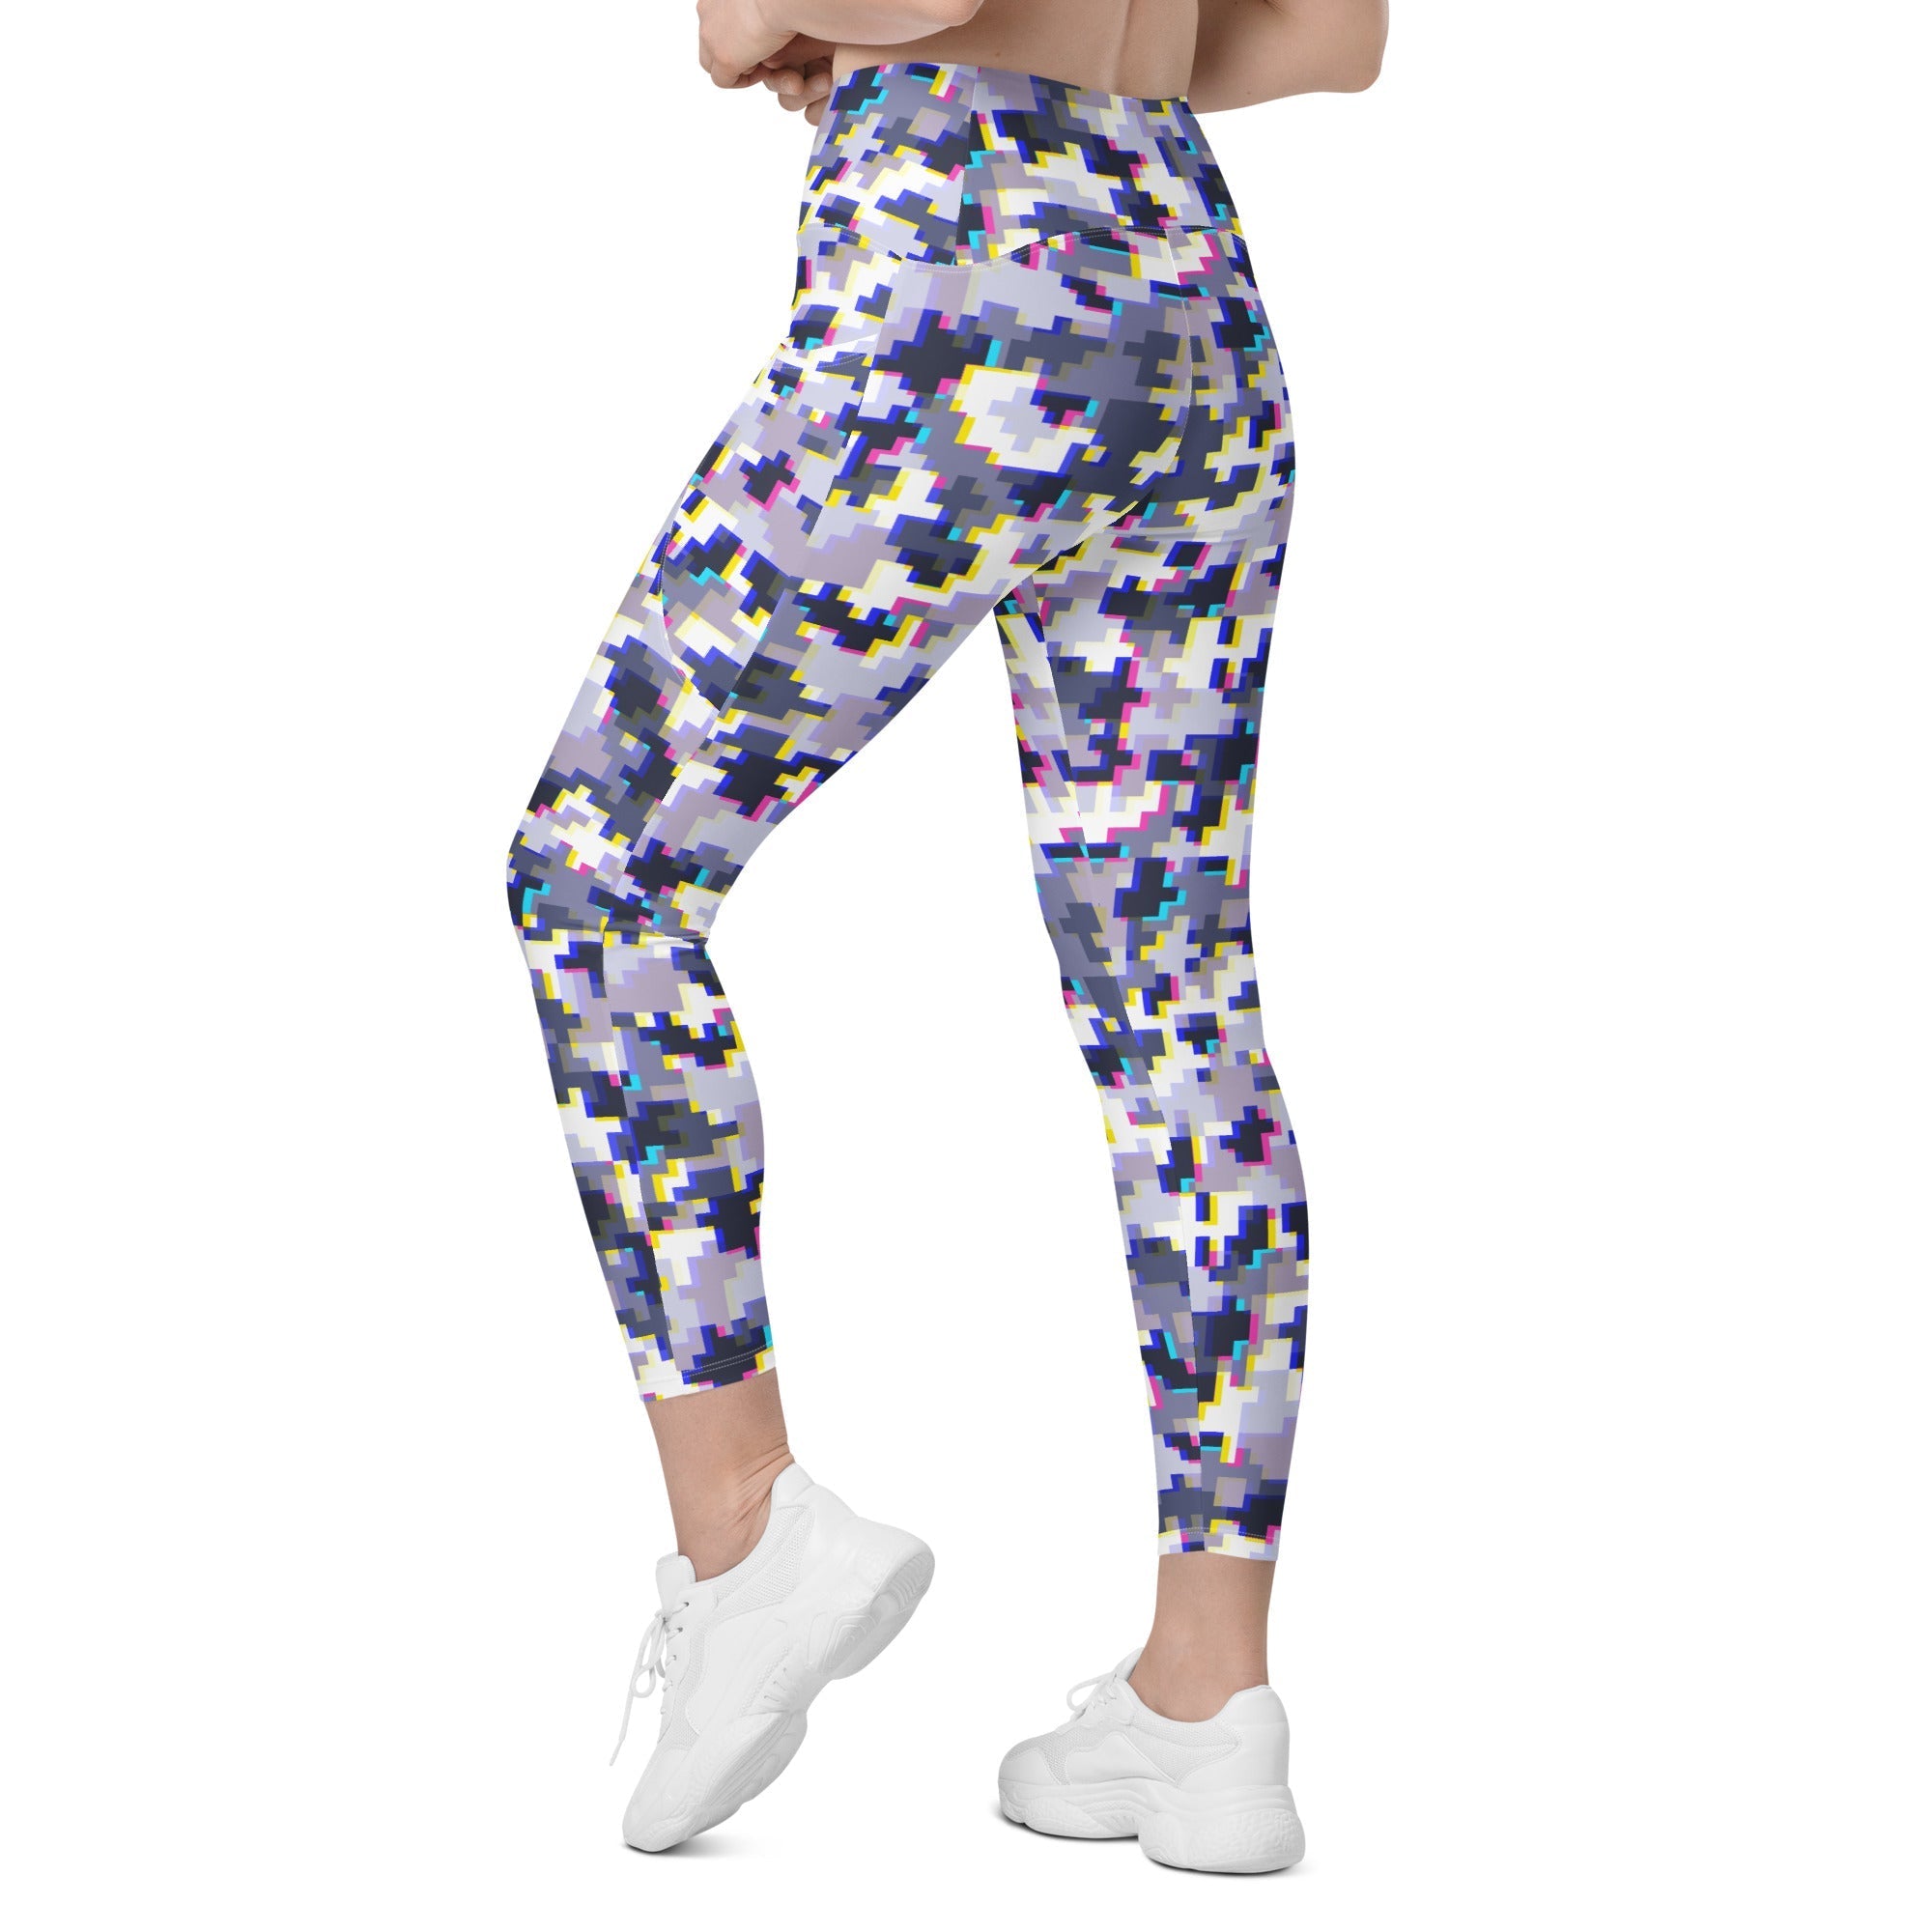 Glitchy Camo Crossover Leggings With Pockets